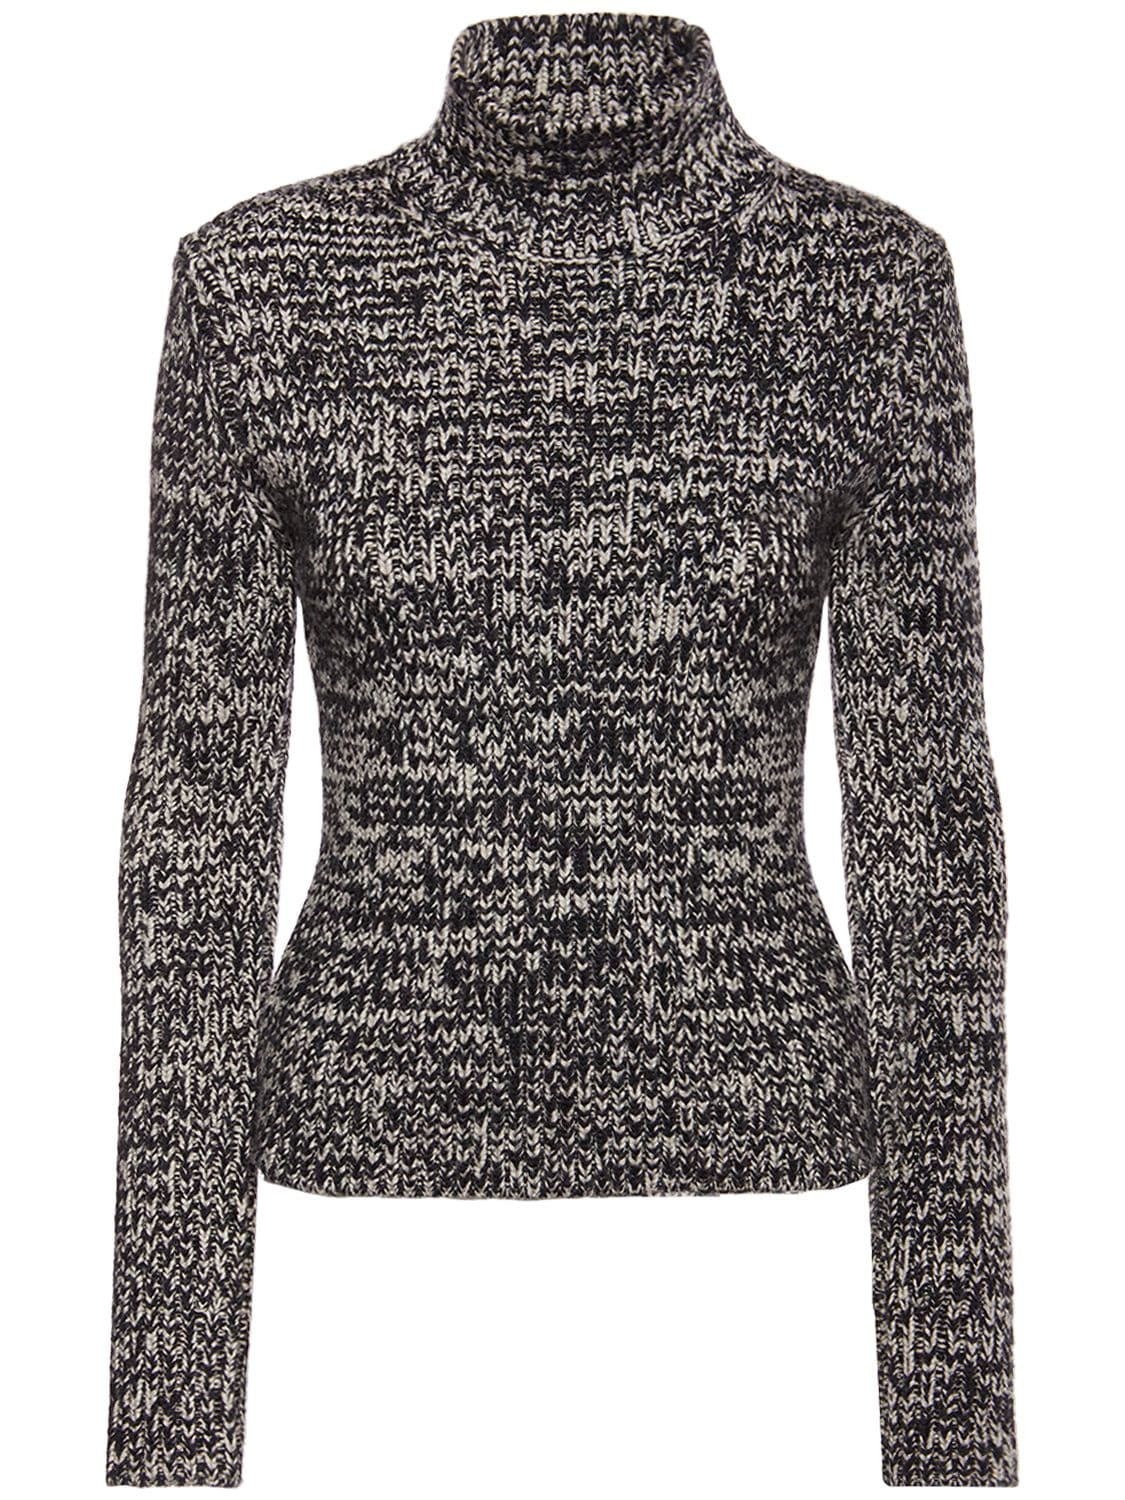 Tom Ford Wool & Silk Knit Turtleneck Sweater In Multicolor